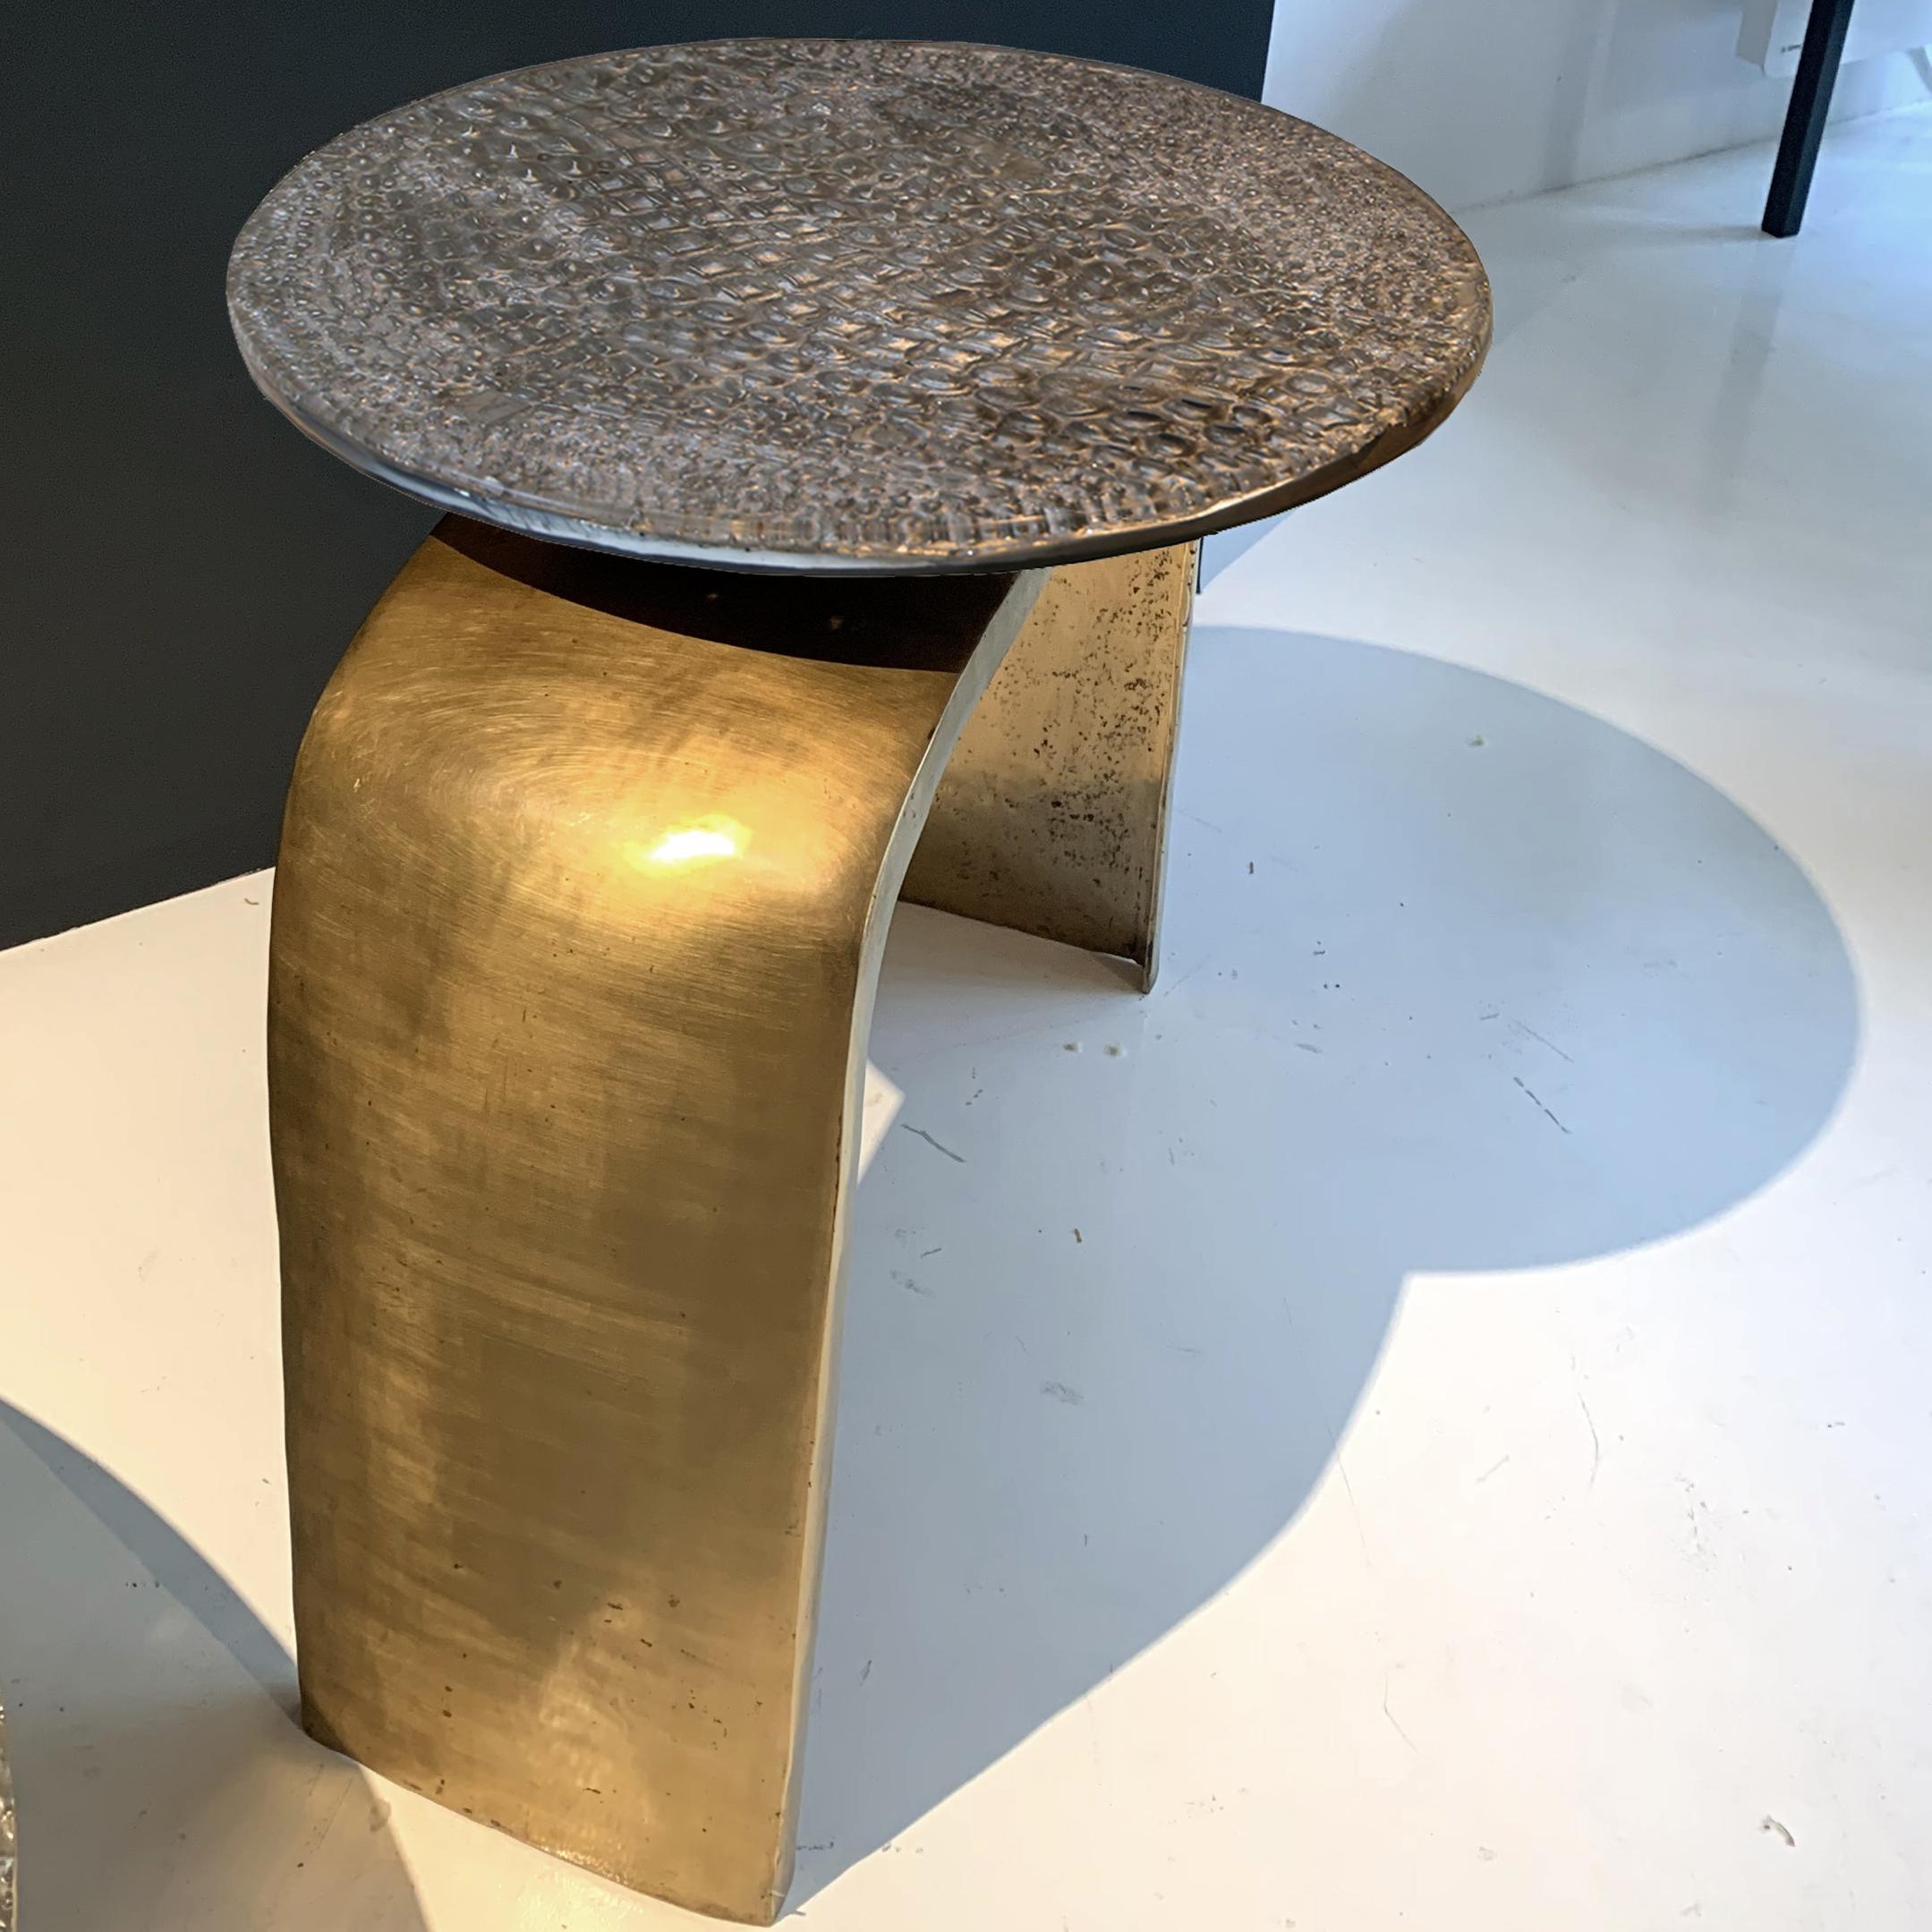 Made to order: This contemporary table is a unique piece, created by Xavier Lavergne and made of melted pewter with scales design, embedded in resin and polished like a marble. The table bronze legs are created in France and handmade in Africa with